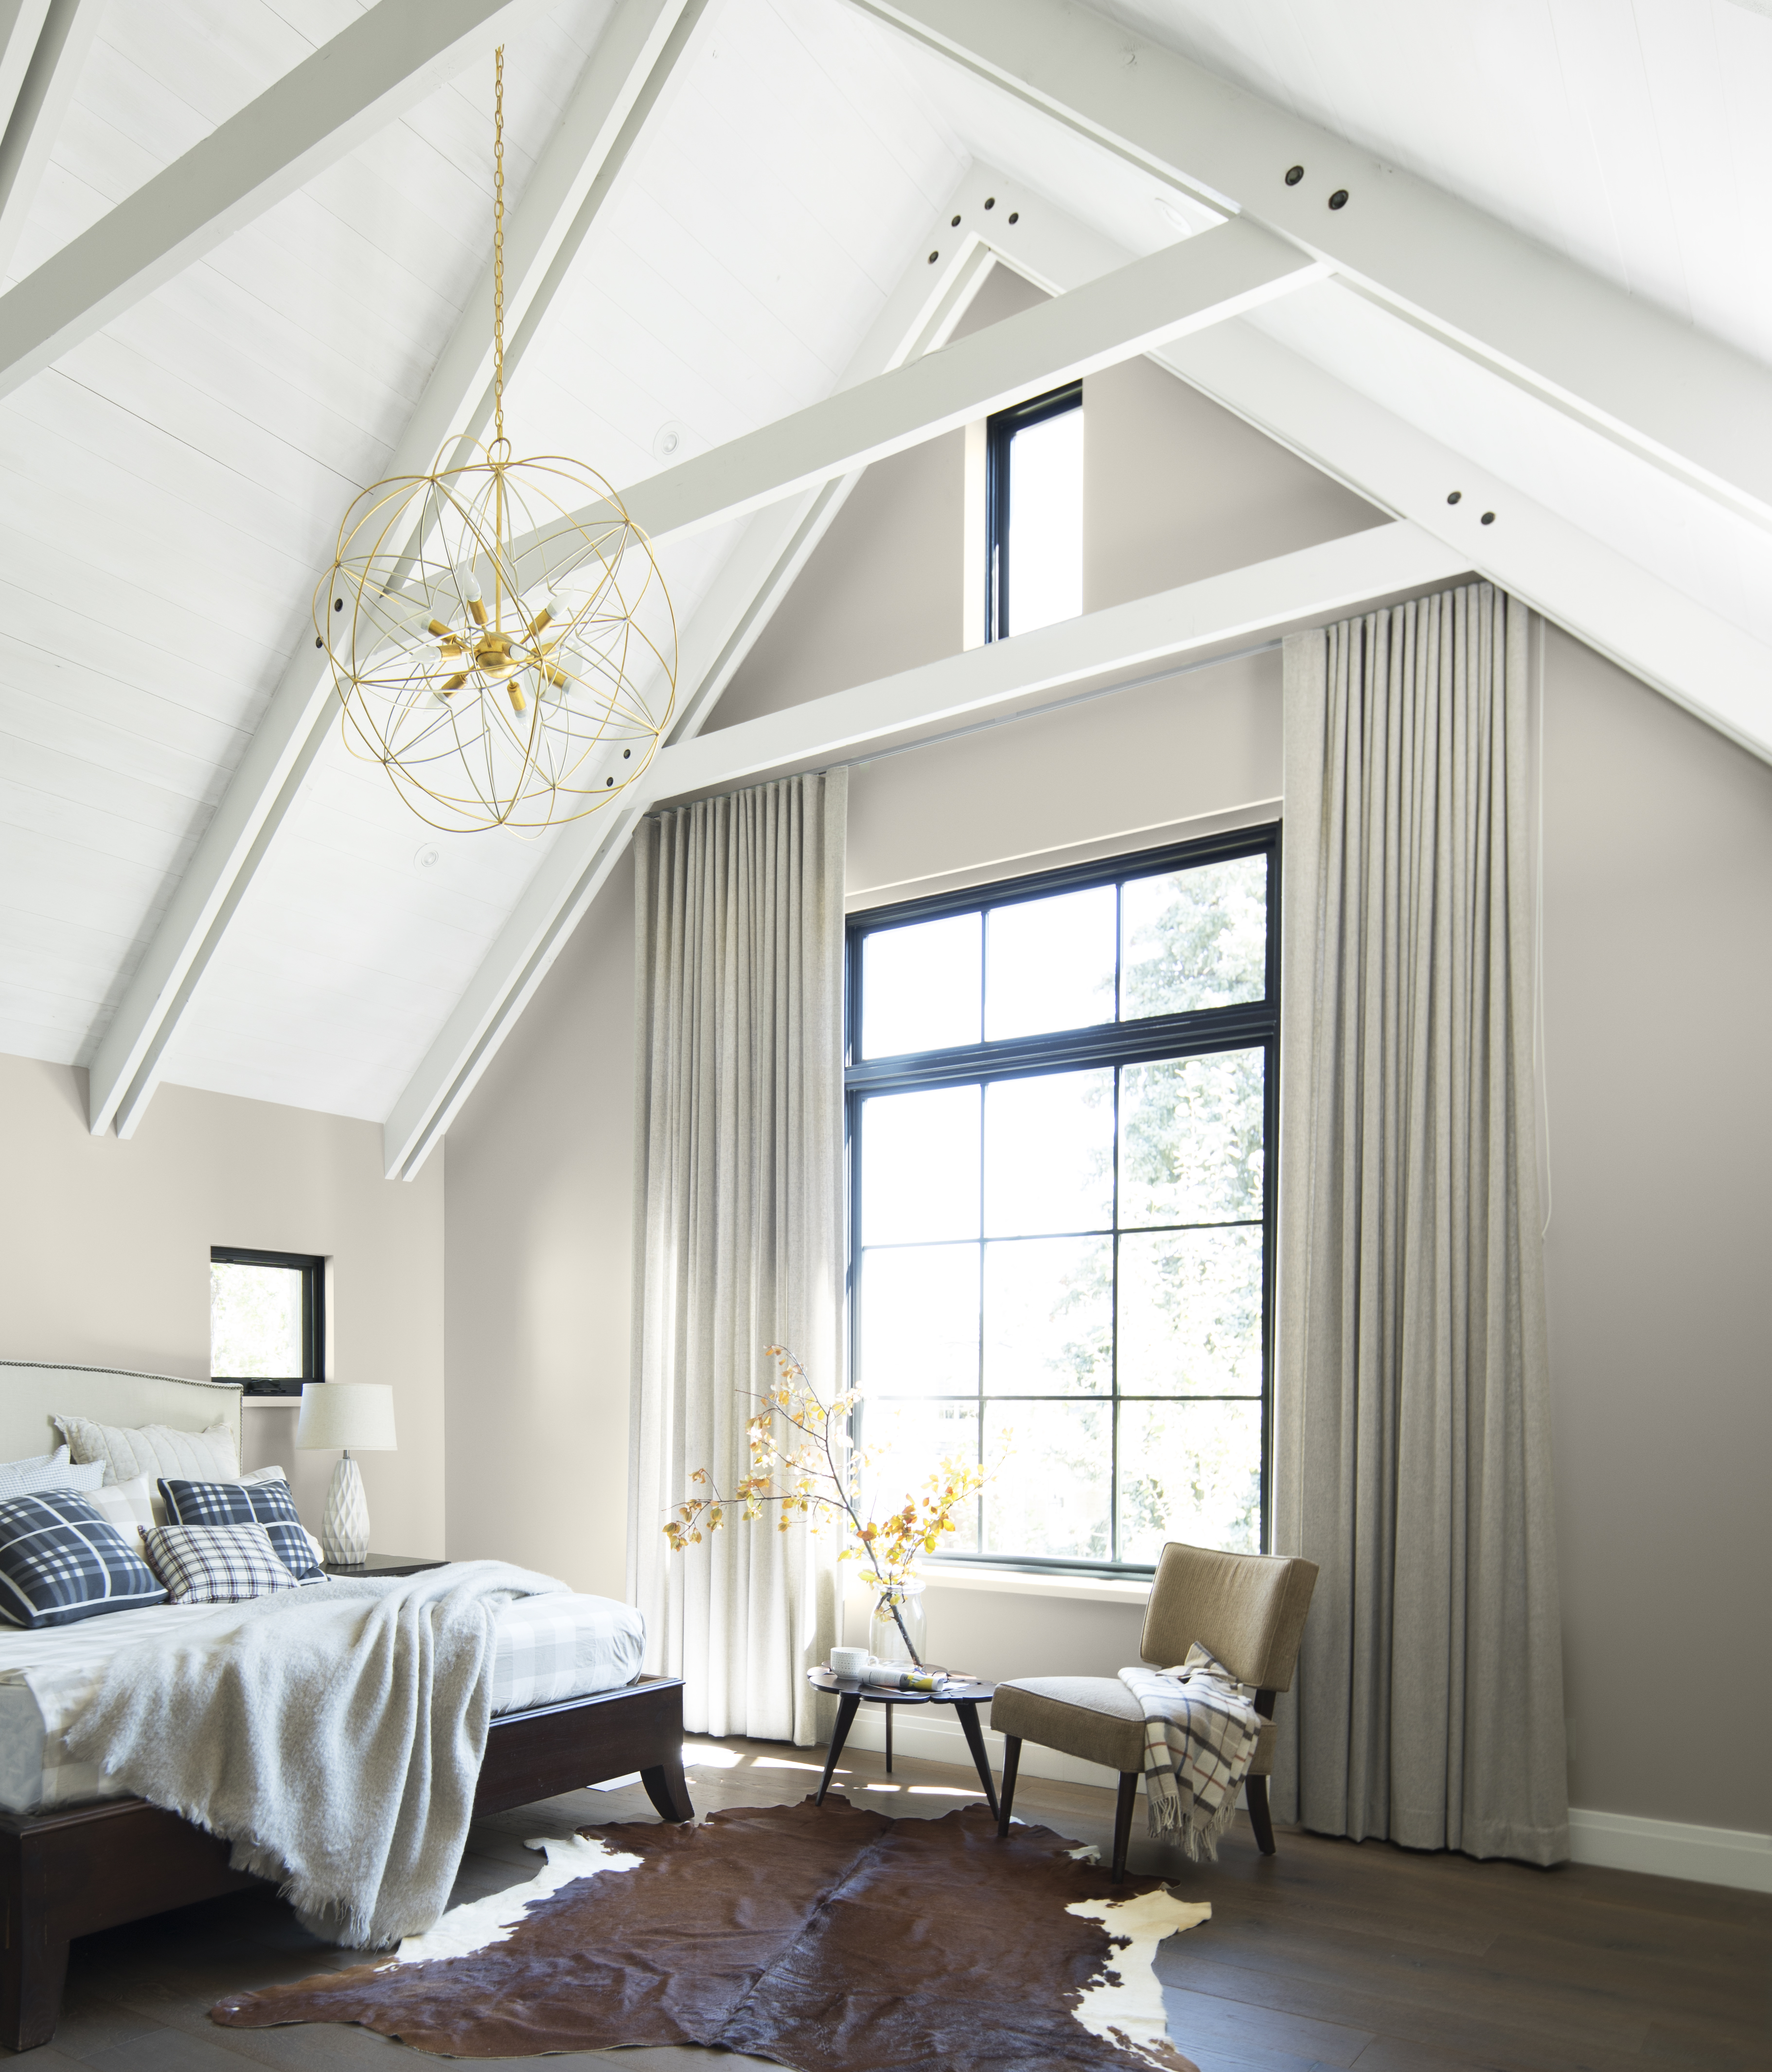 bedroom-with-vaulted-ceiling-and-beams.jpg